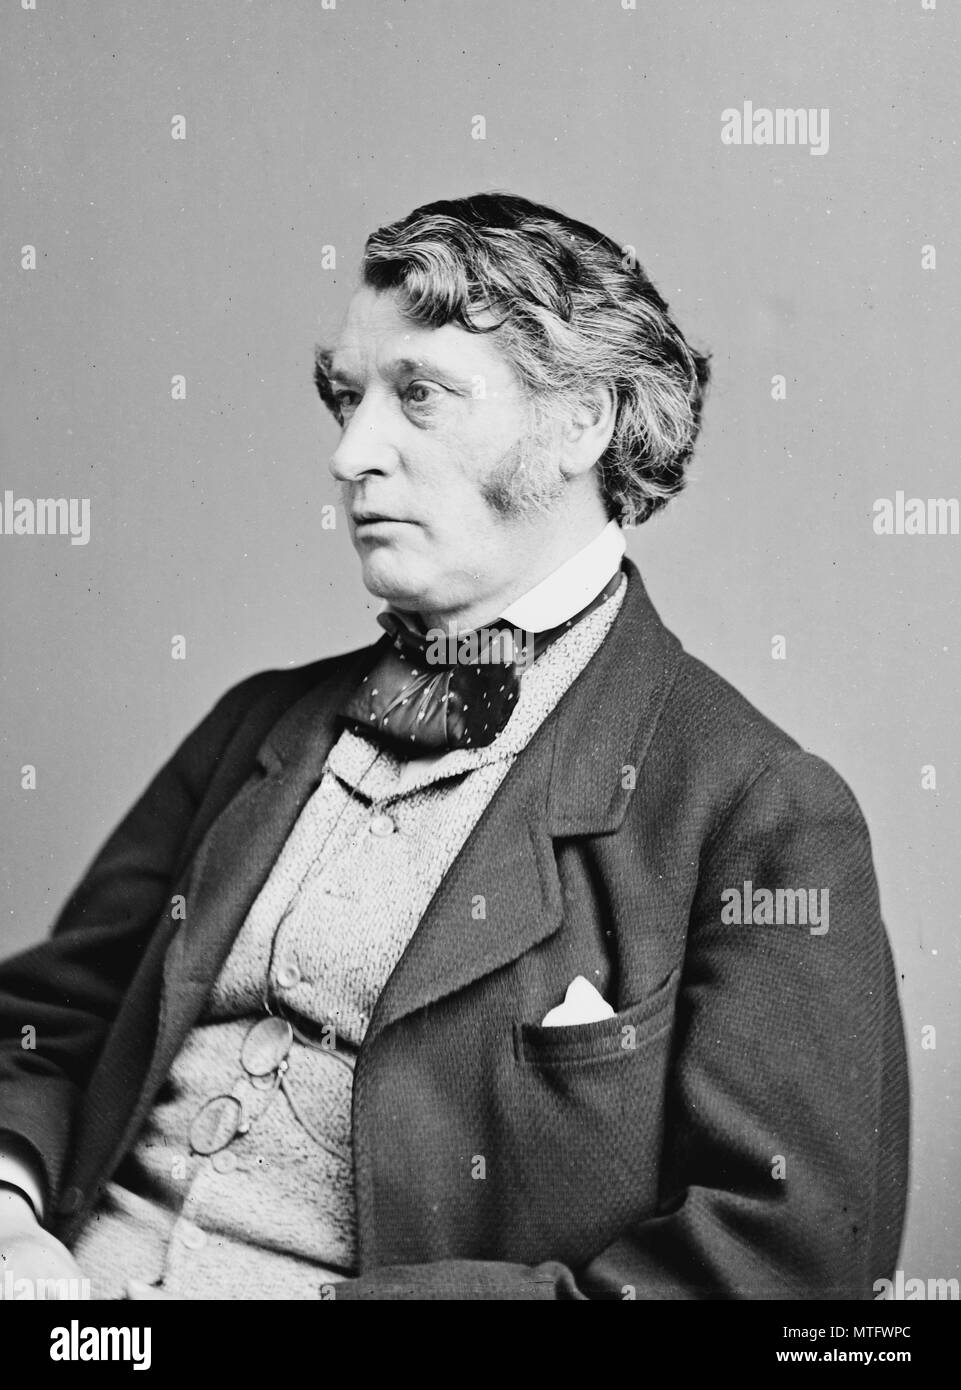 Charles Sumner Young